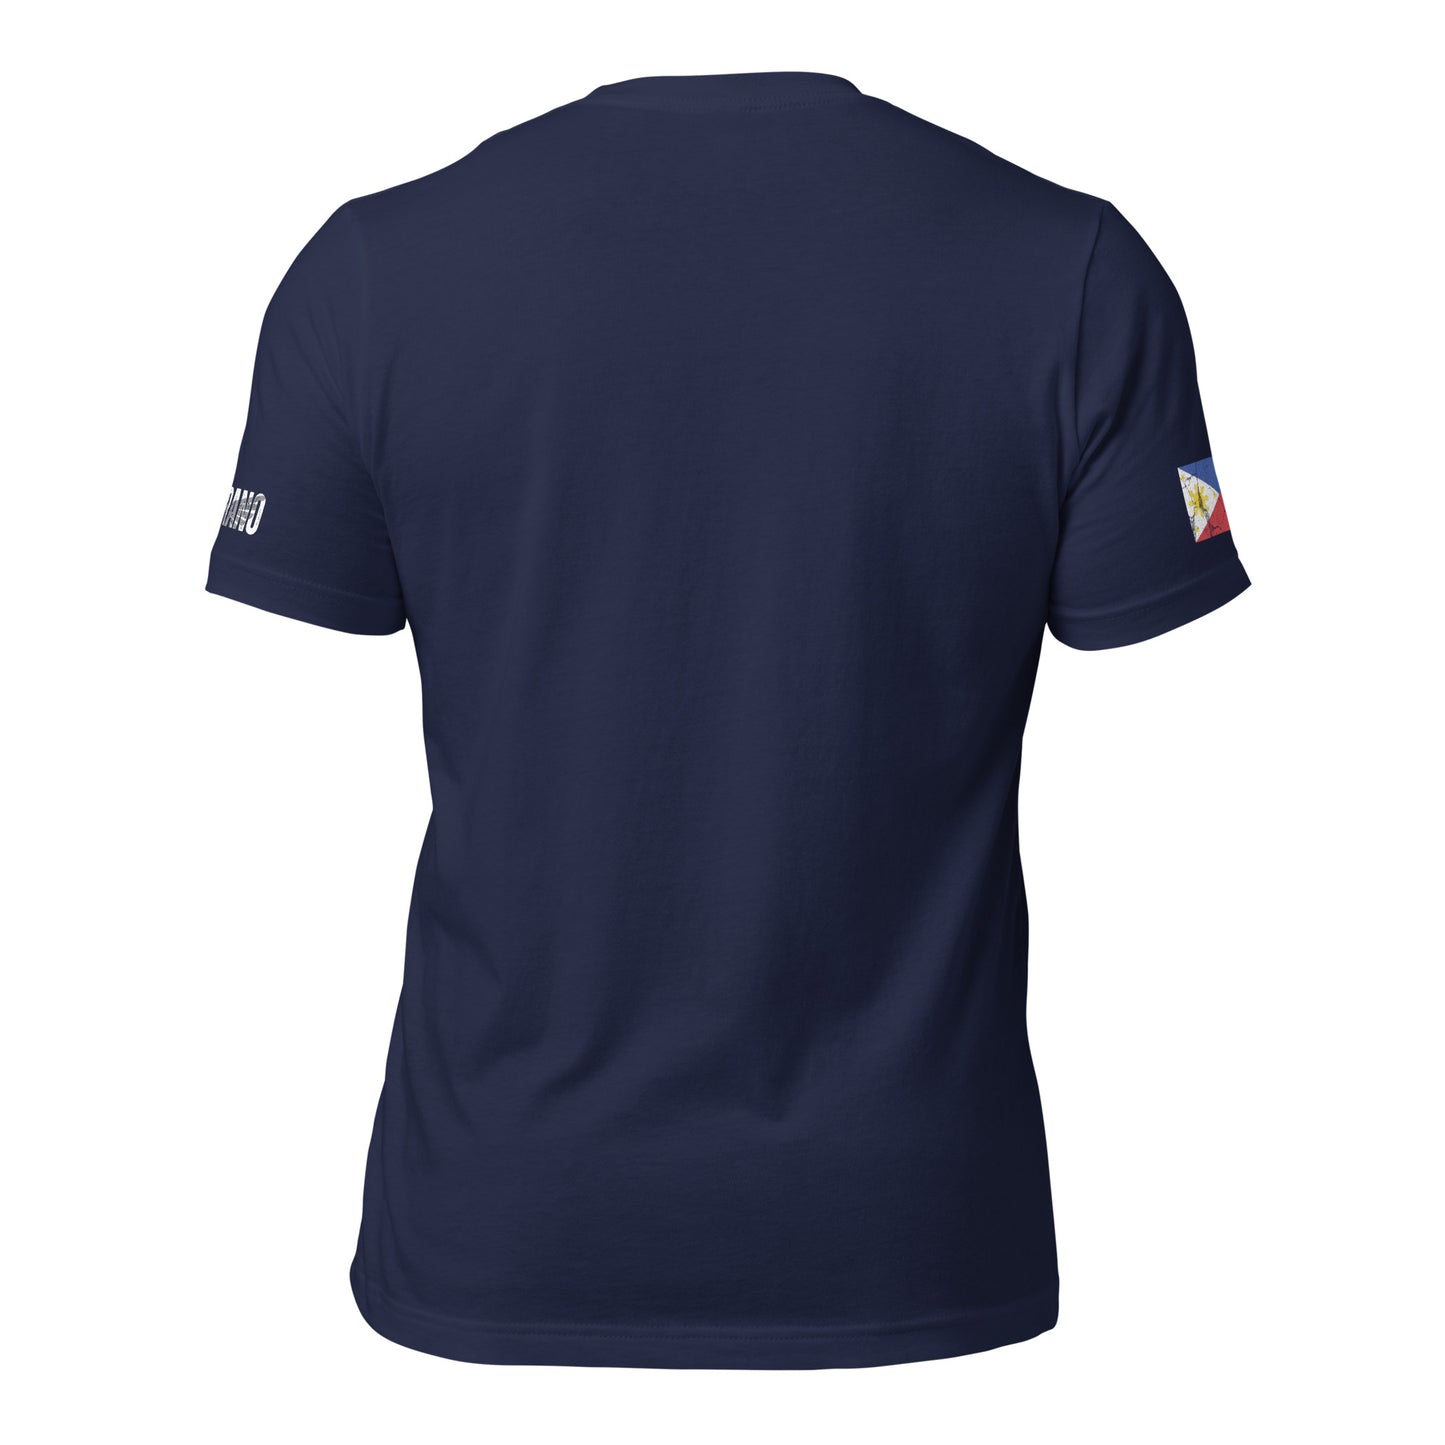 Pinoy Valor: The Legacy Tee